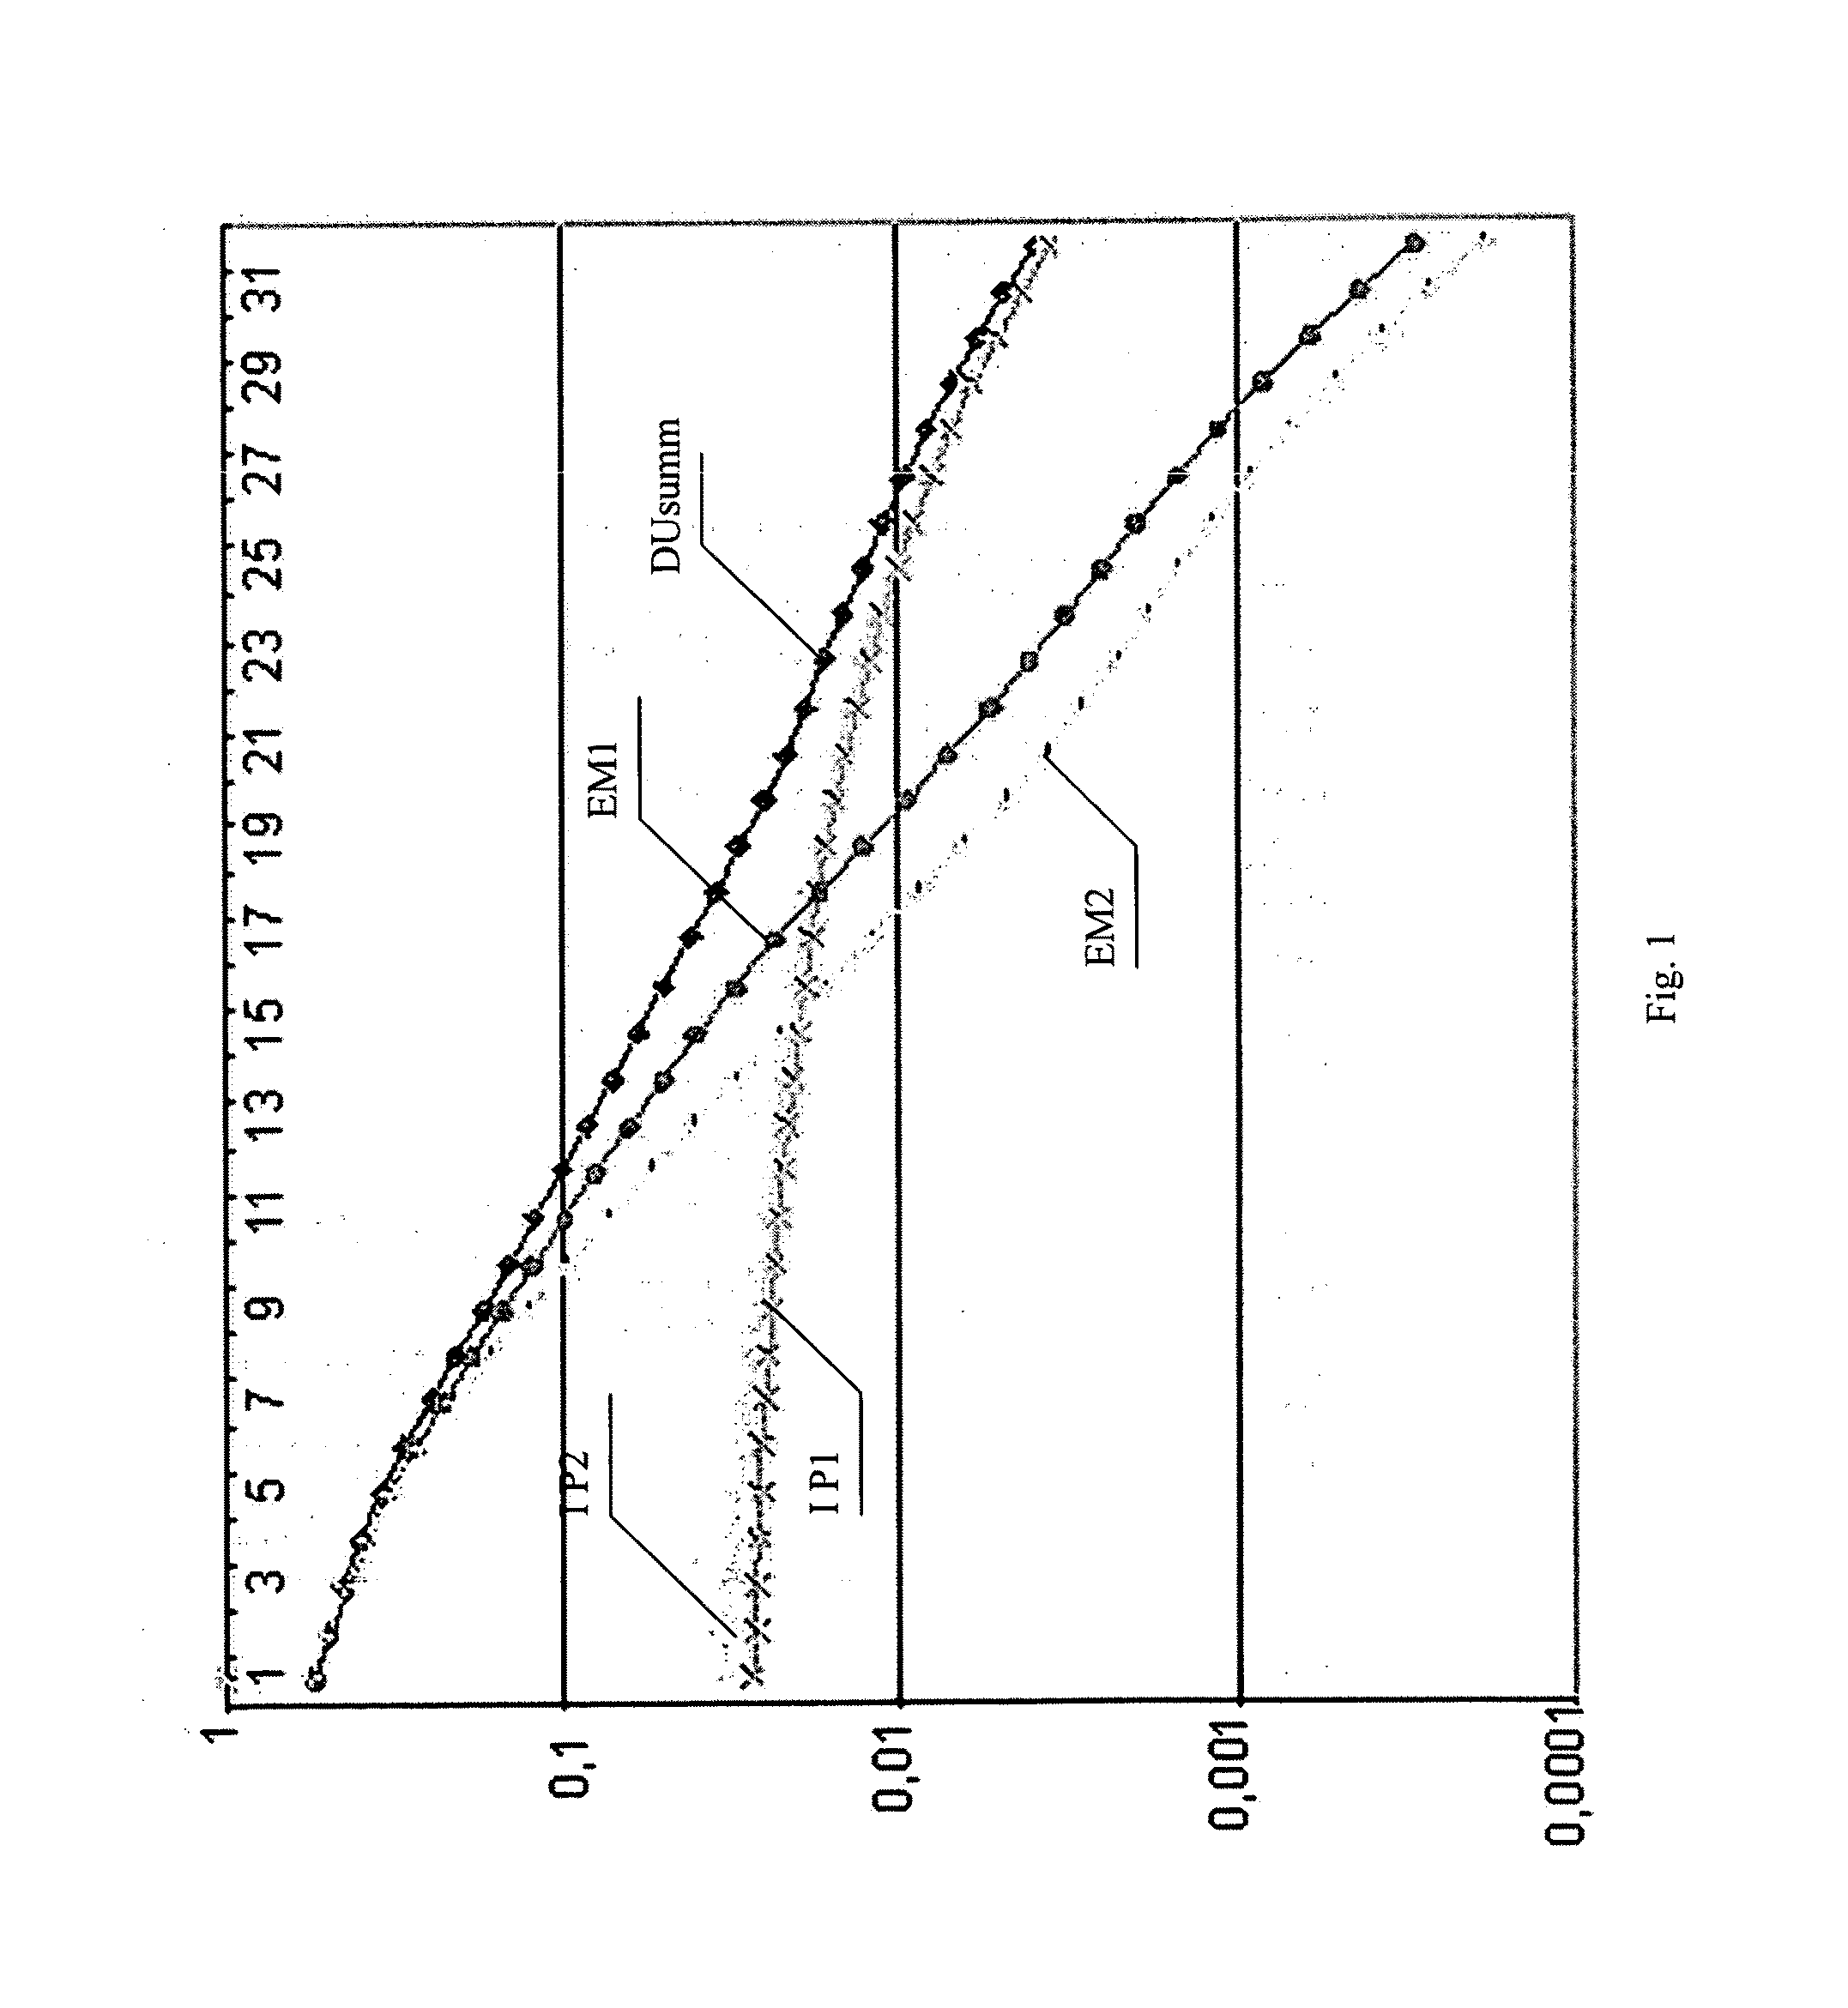 Method for quantitative separation of electromagnetic induction and induced polarization effects